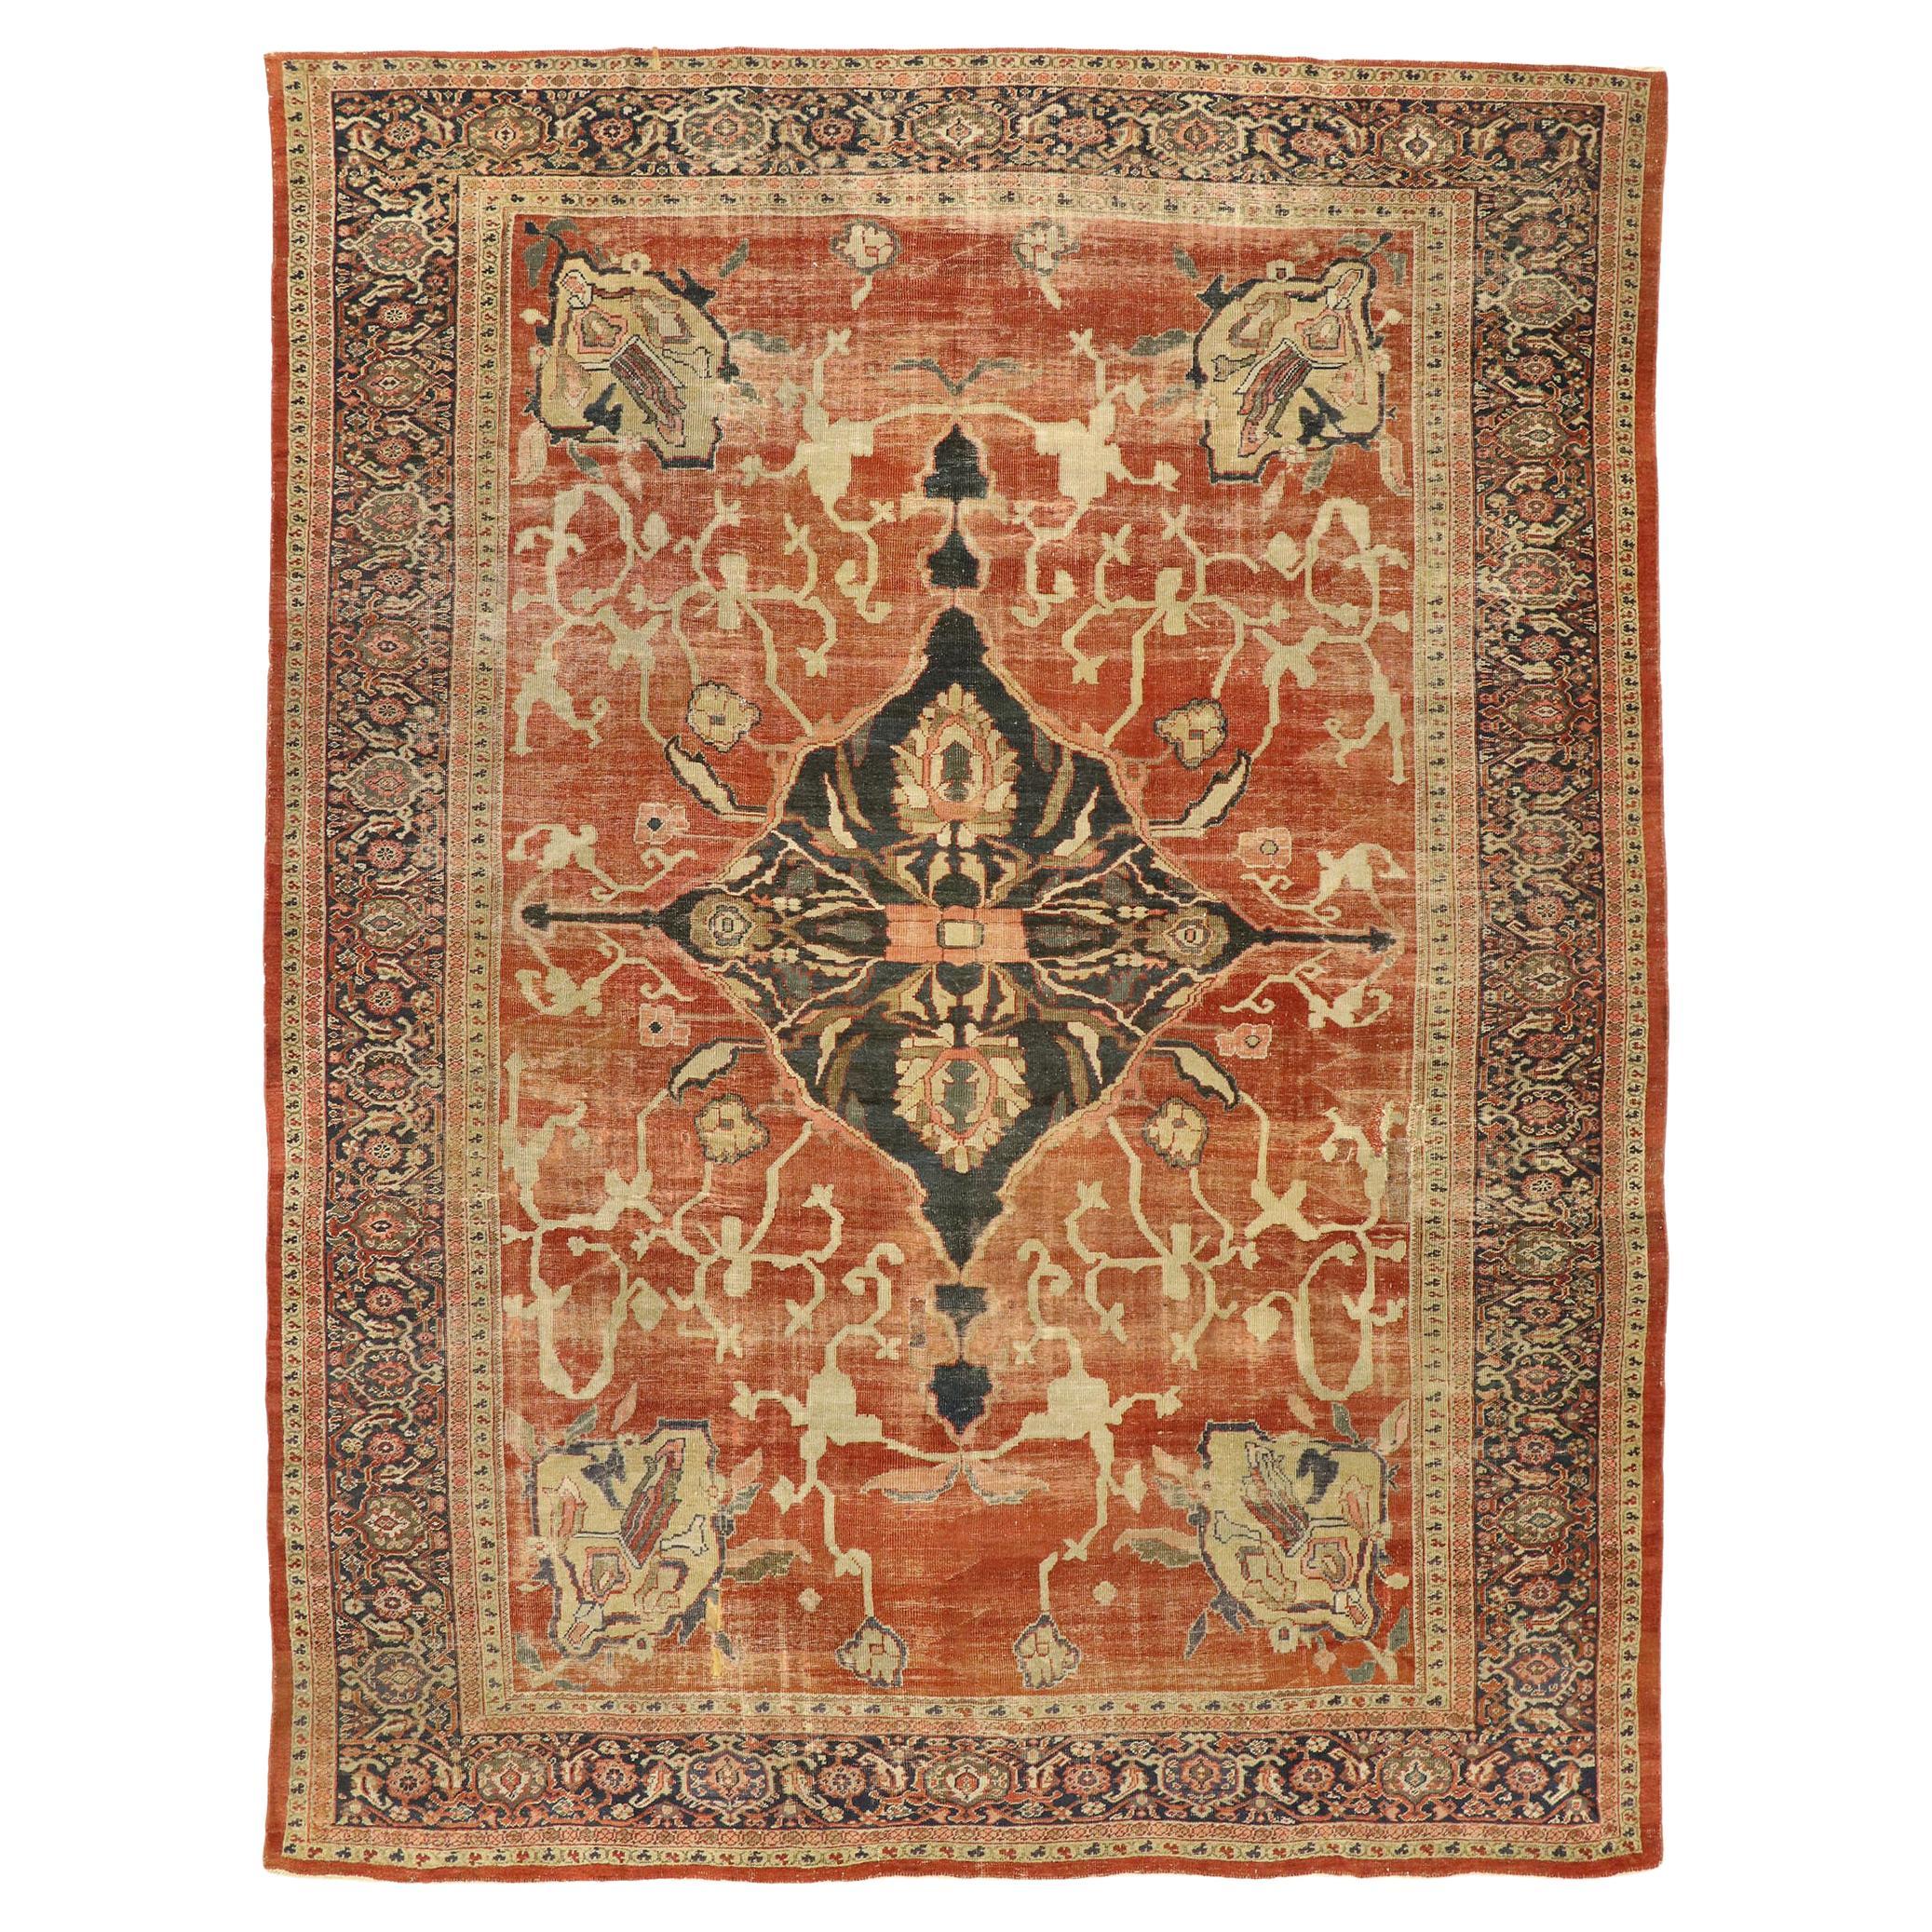 Distressed Antique Persian Sultanabad Rug with Traditional English Rustic Style